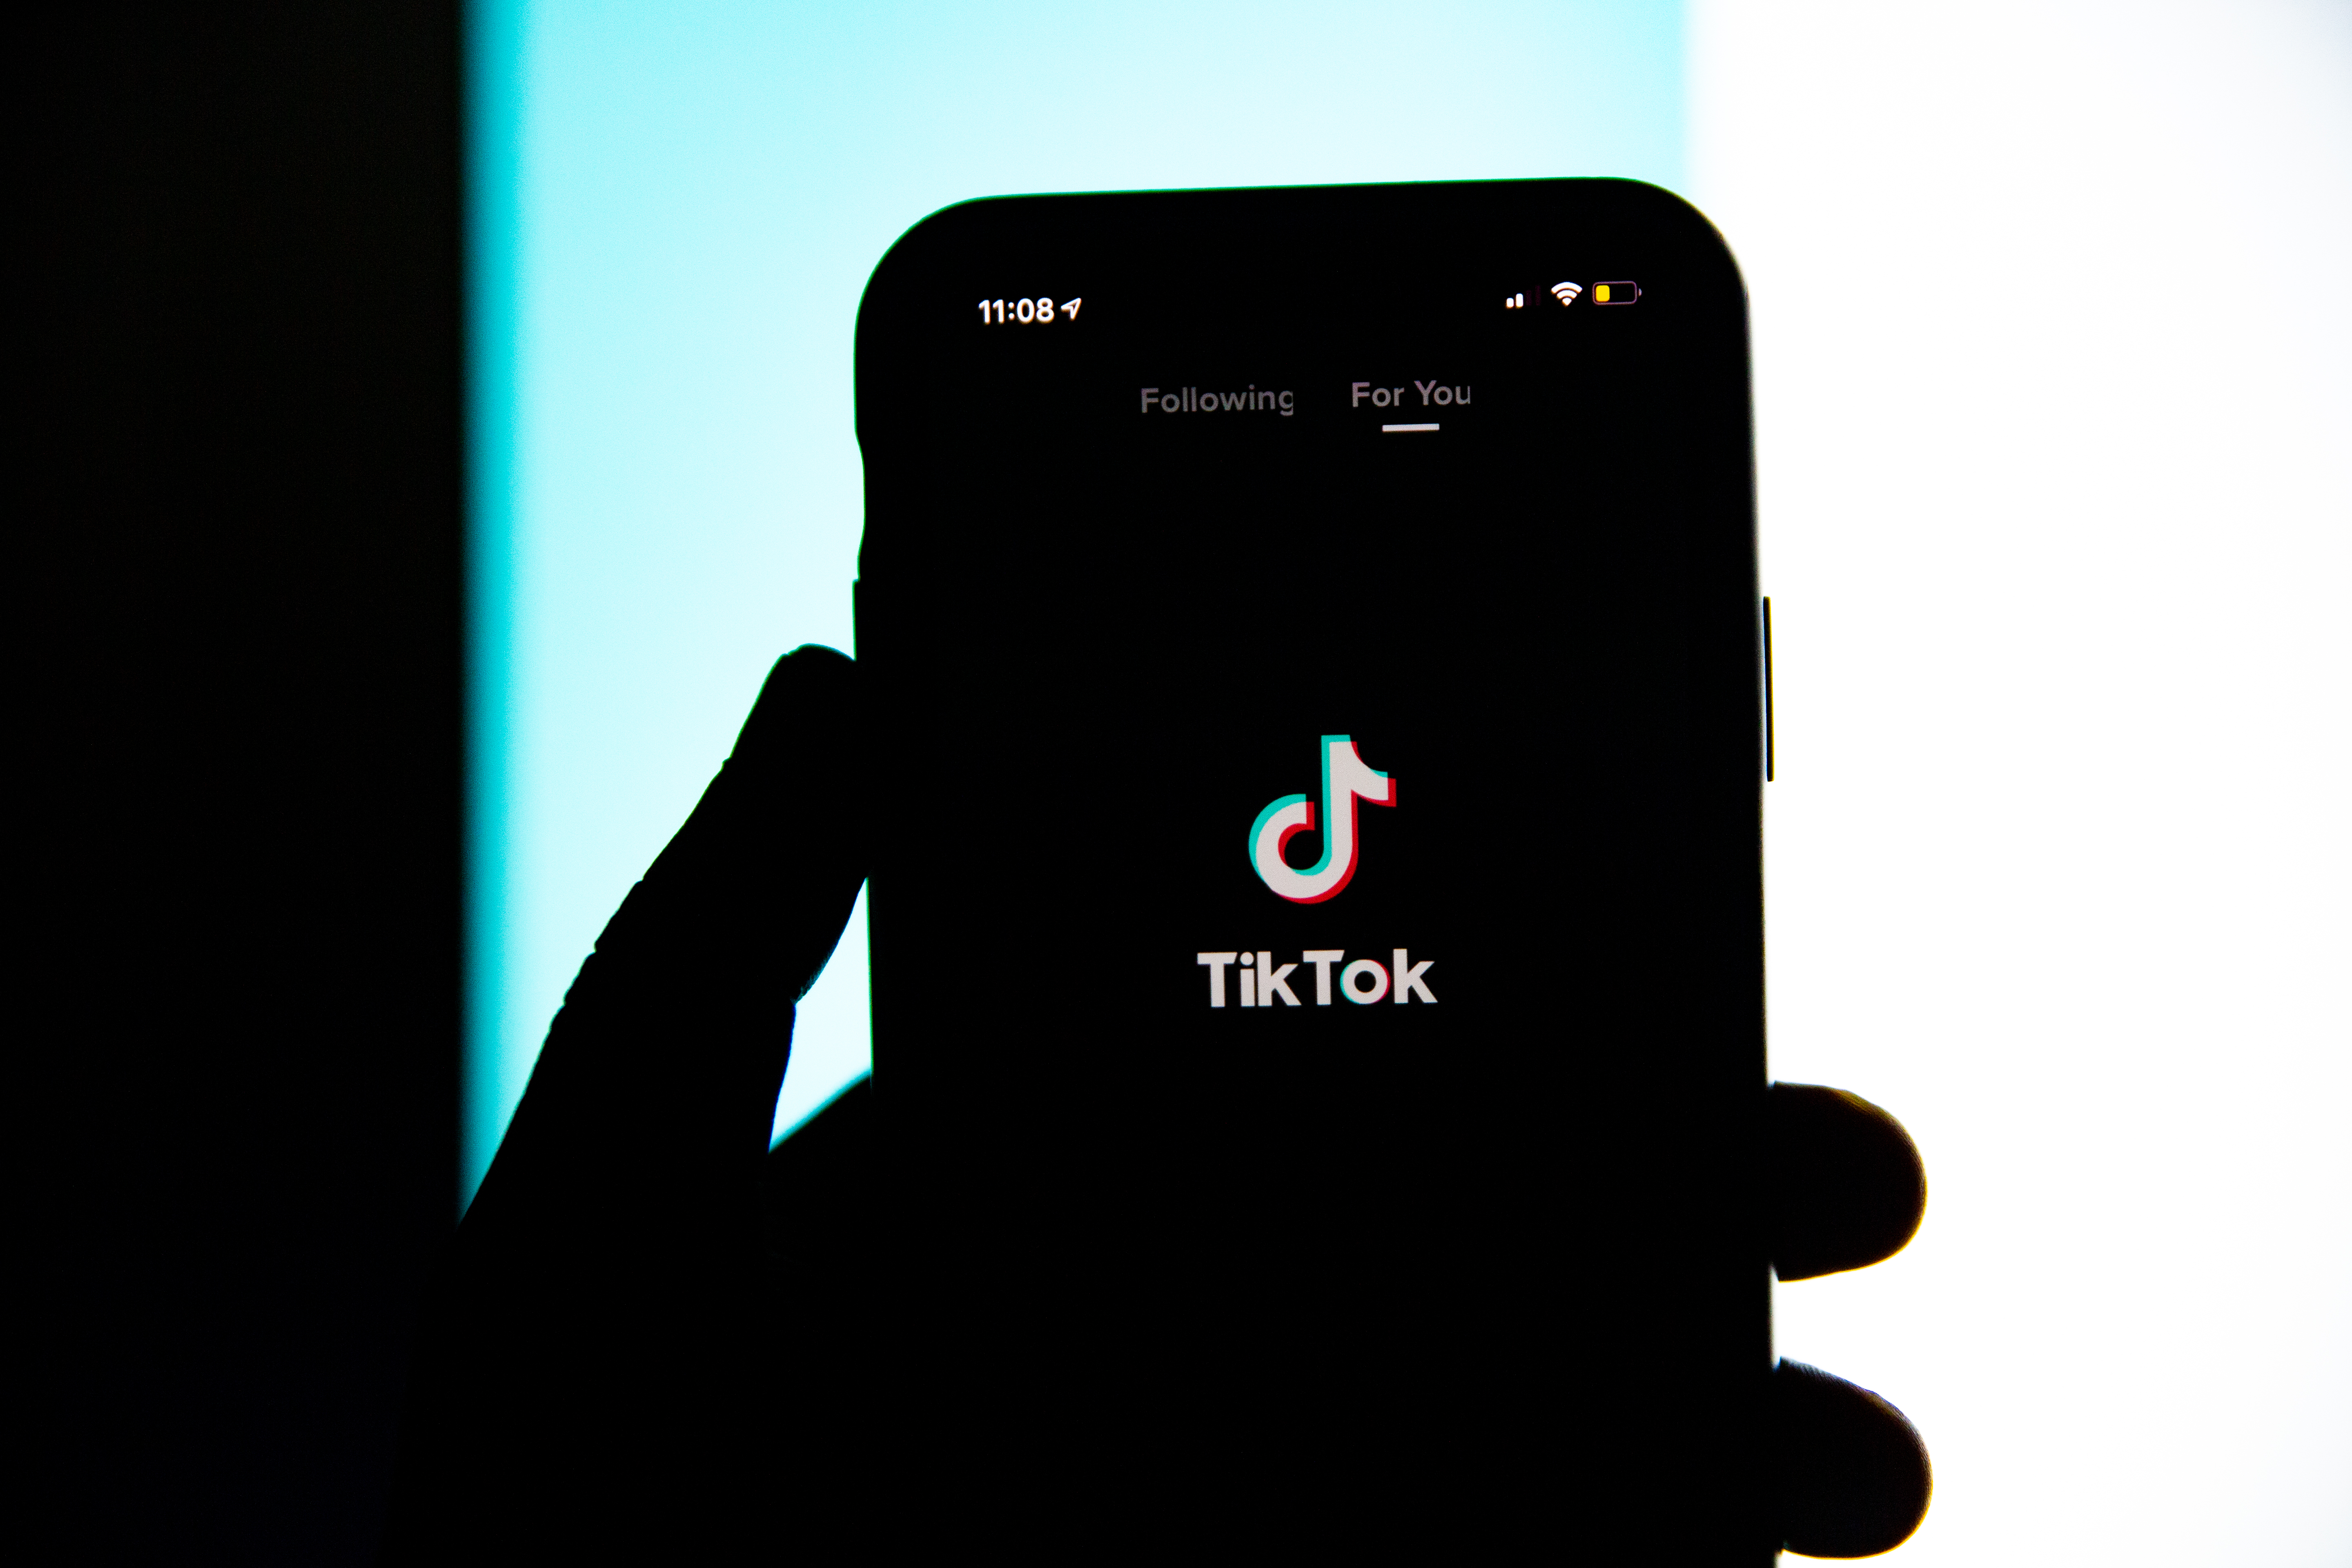 What Happened to TikTok’s Project Texas?